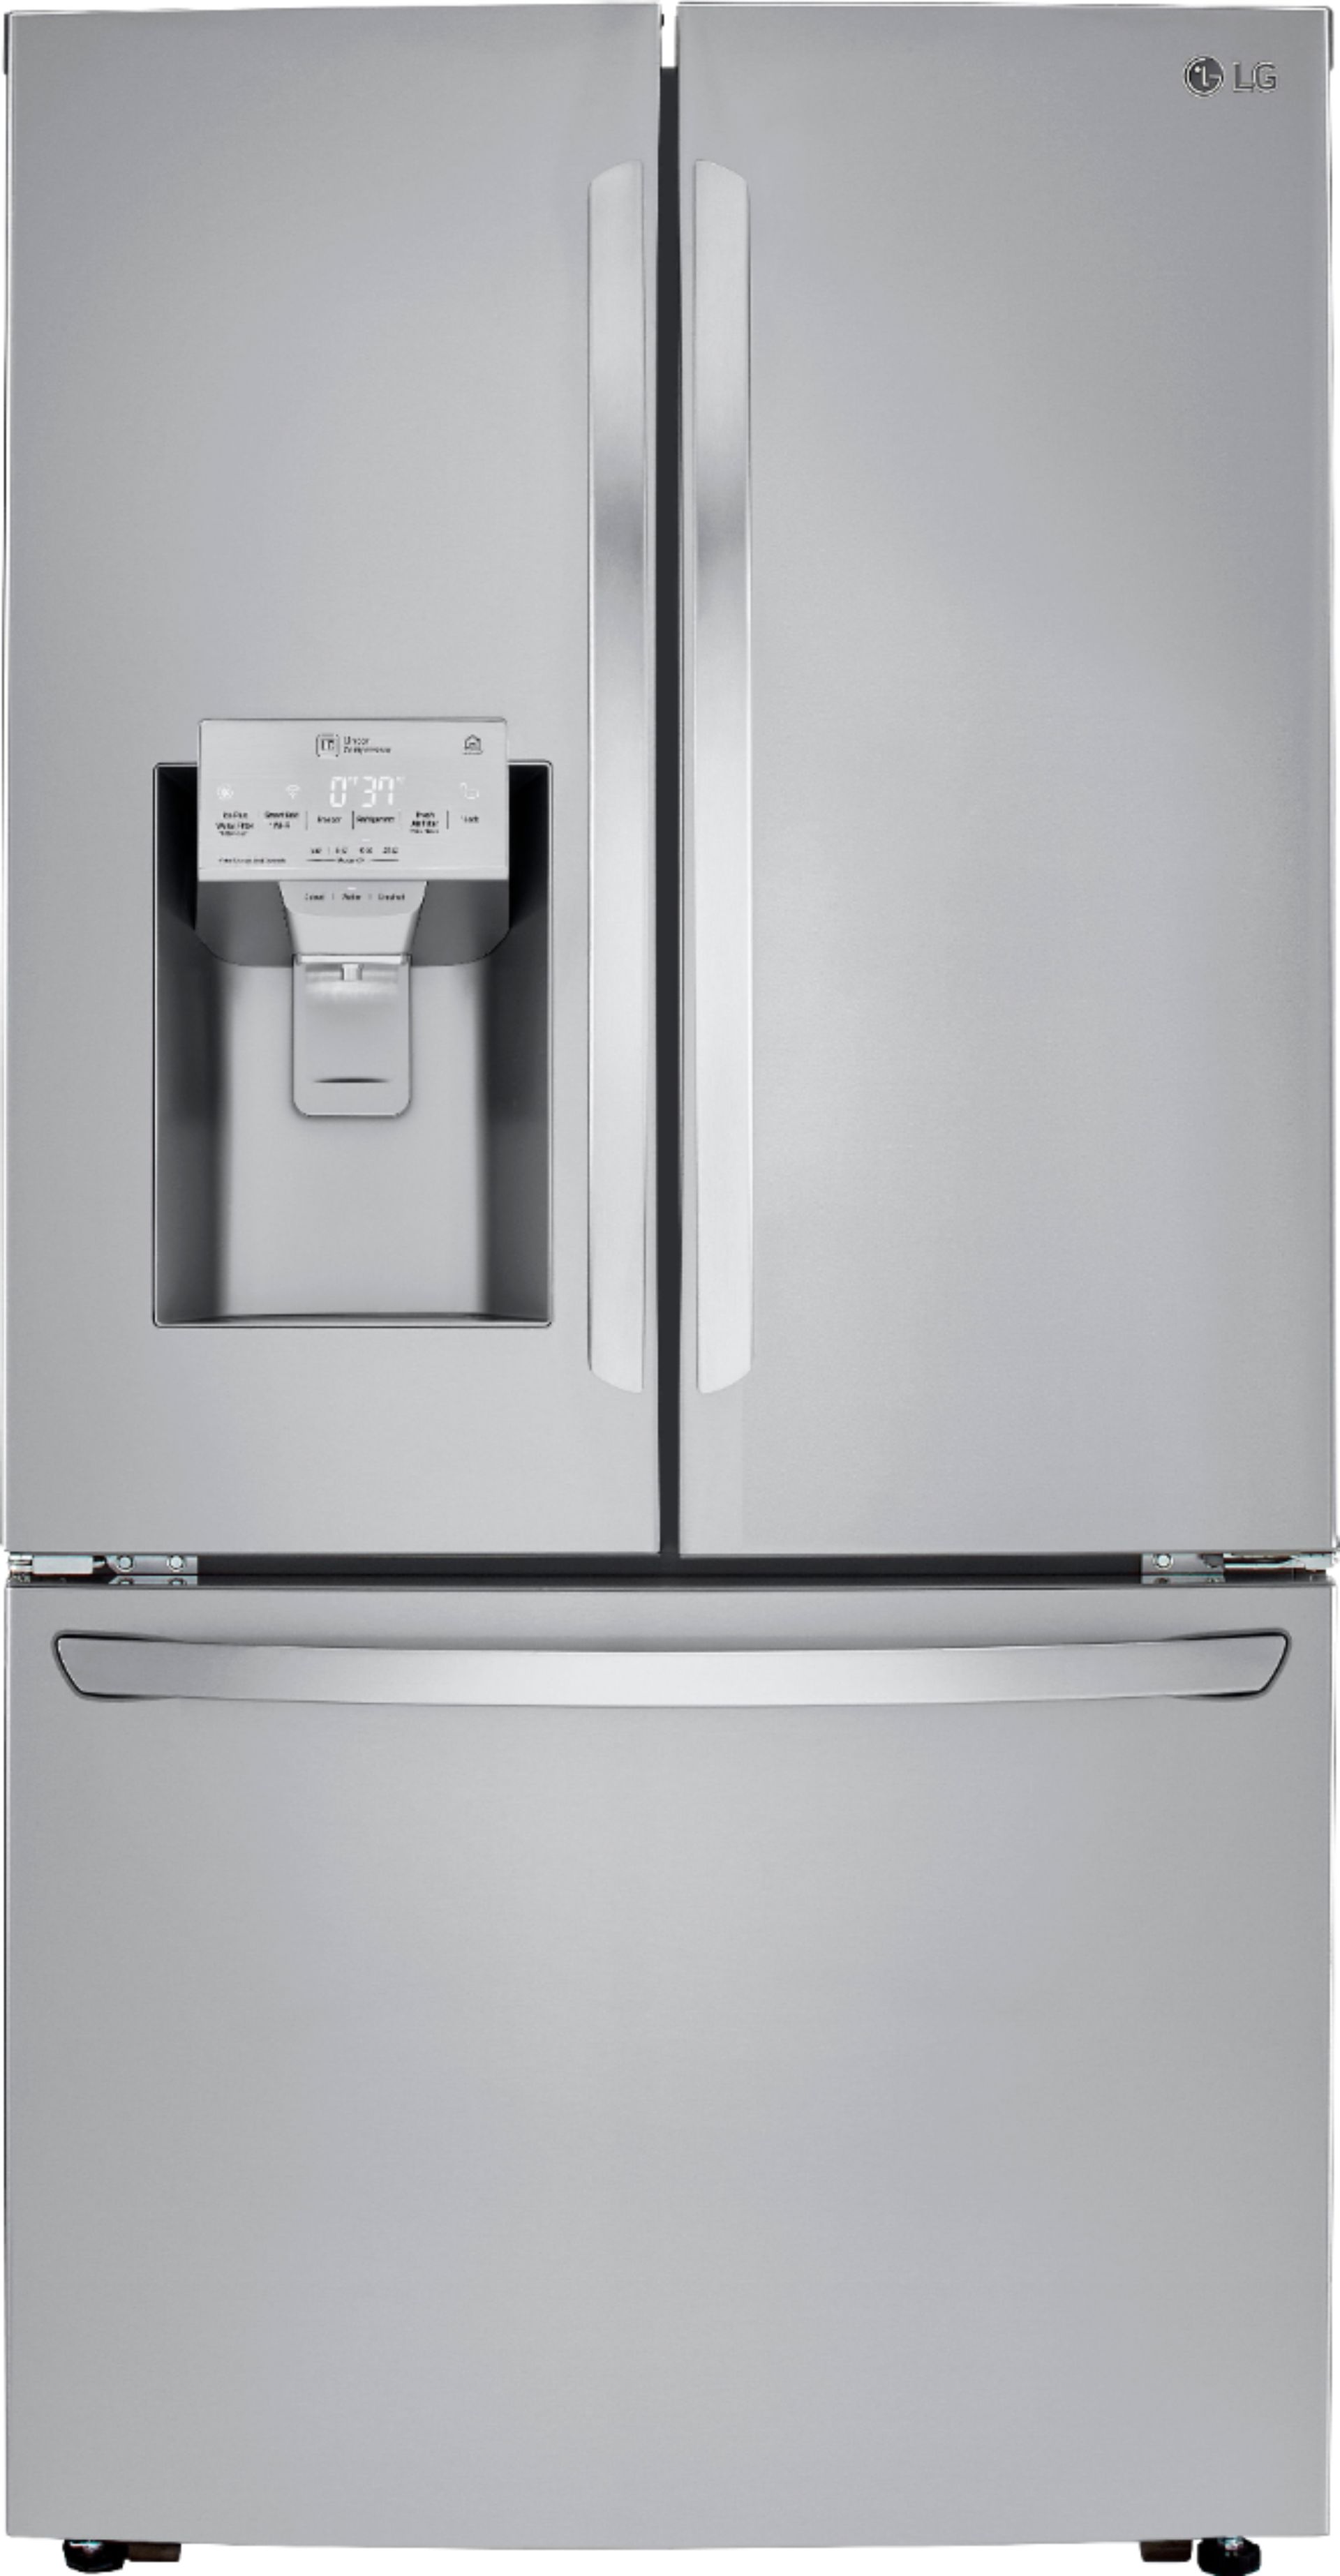 LG 23.5 Cu. Ft. French Door Counter-Depth Smart Refrigerator with